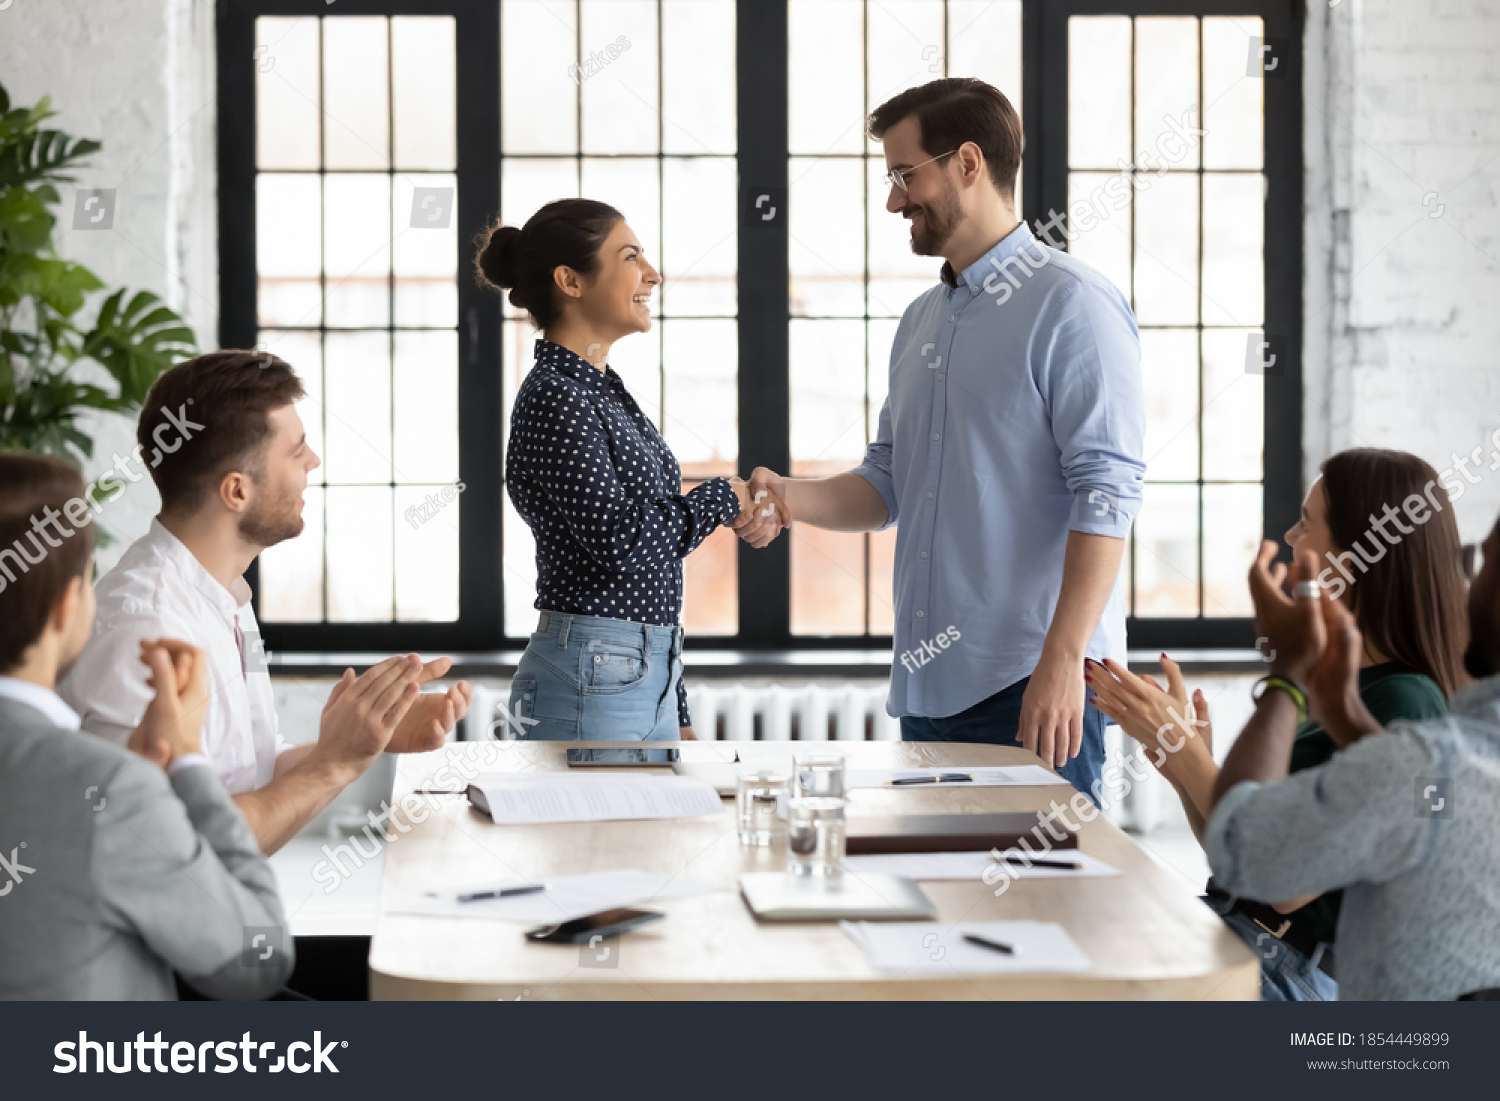 Young caucasian male ceo handshaking with indian female team member on briefing showing respect to her qualification, gratitude for help, recognition of her efforts in developing corporate business #1854449899